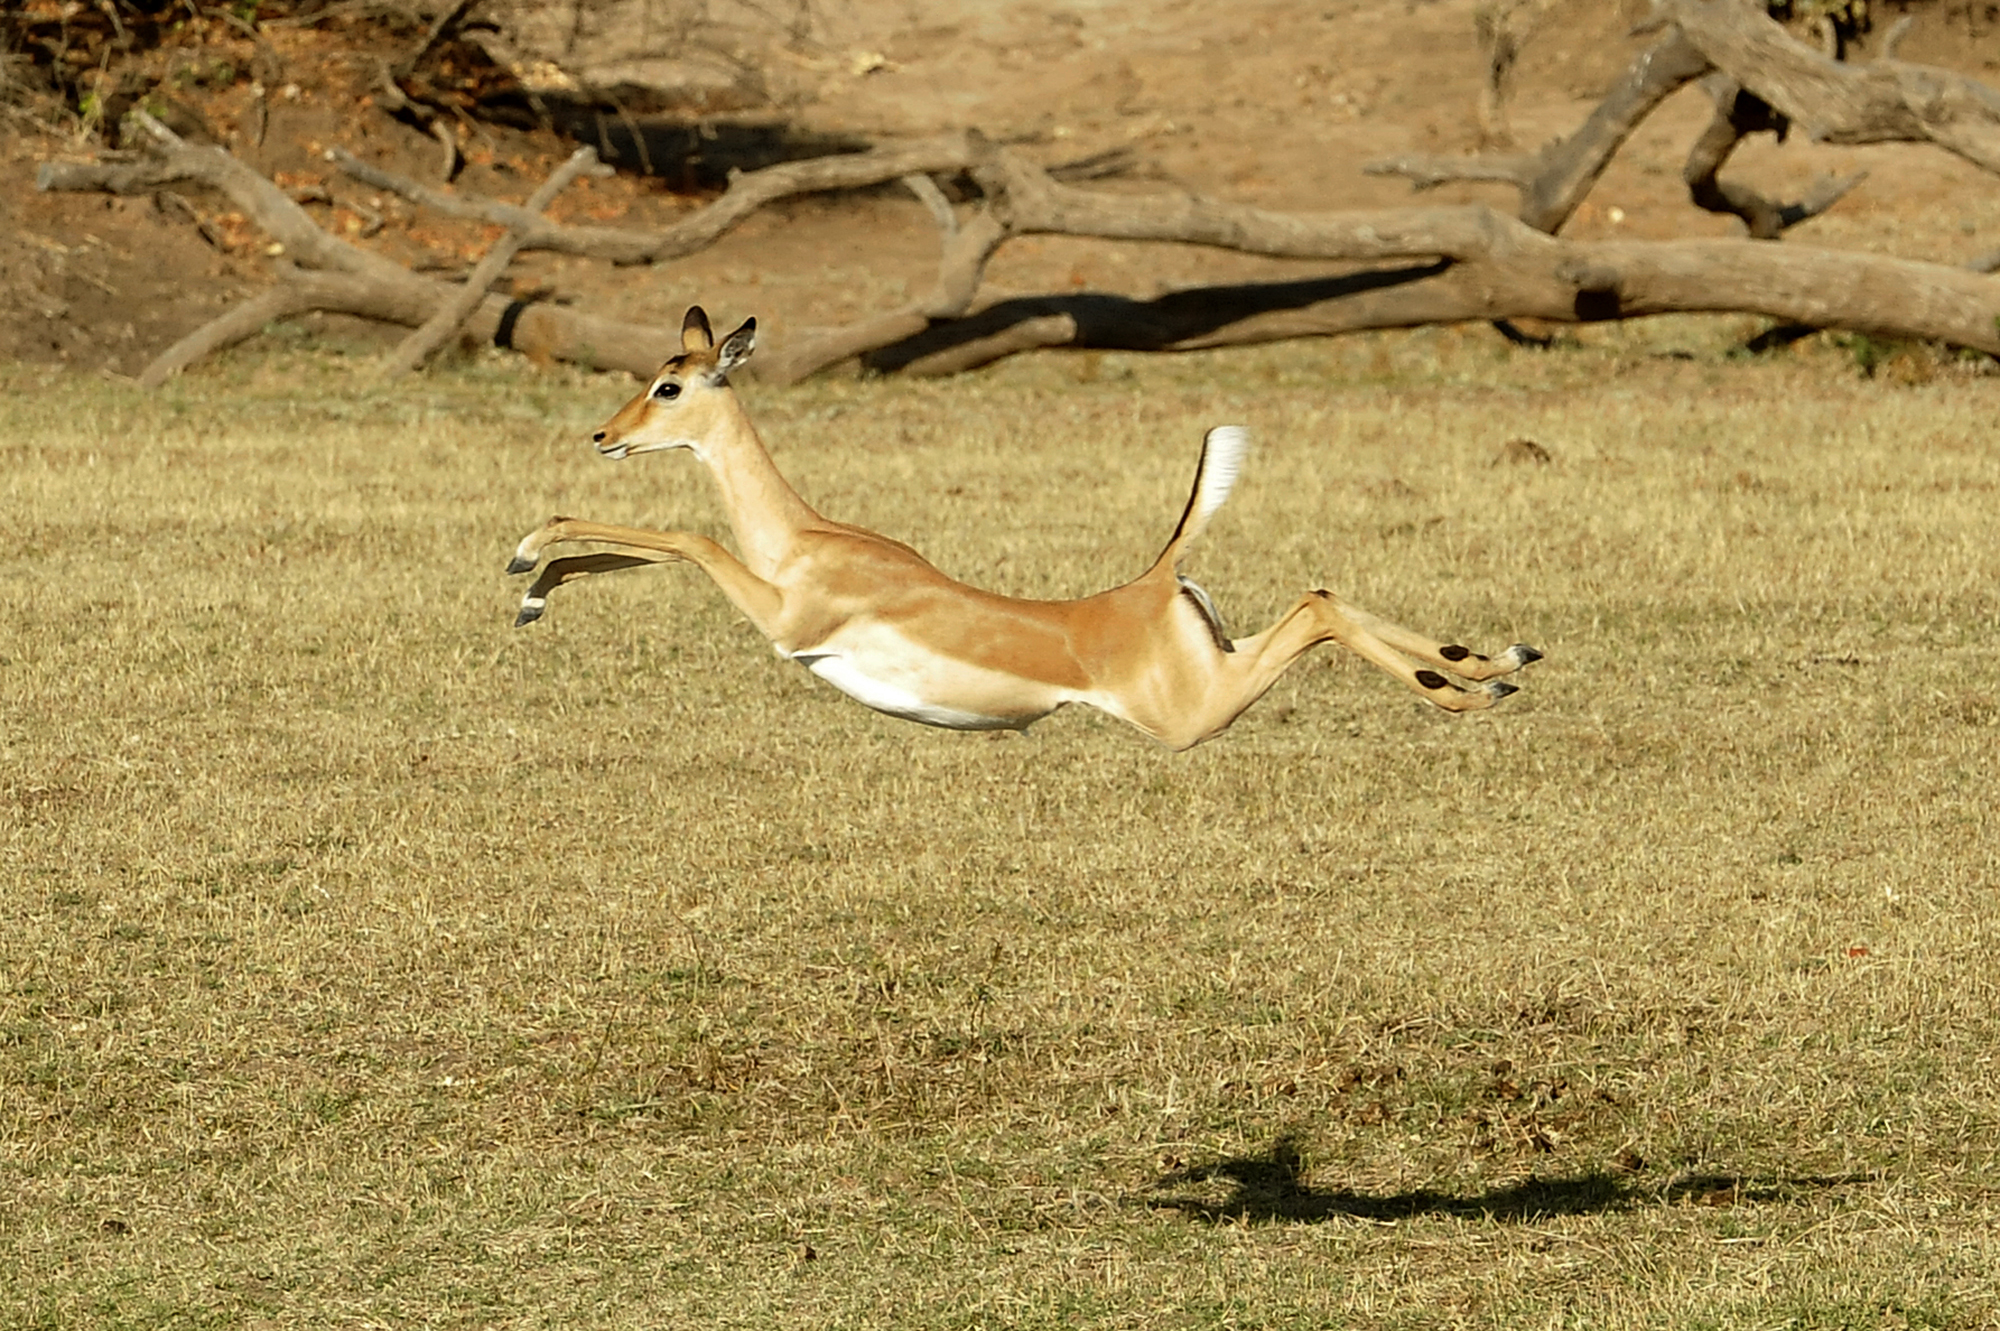 A Leaping Lope